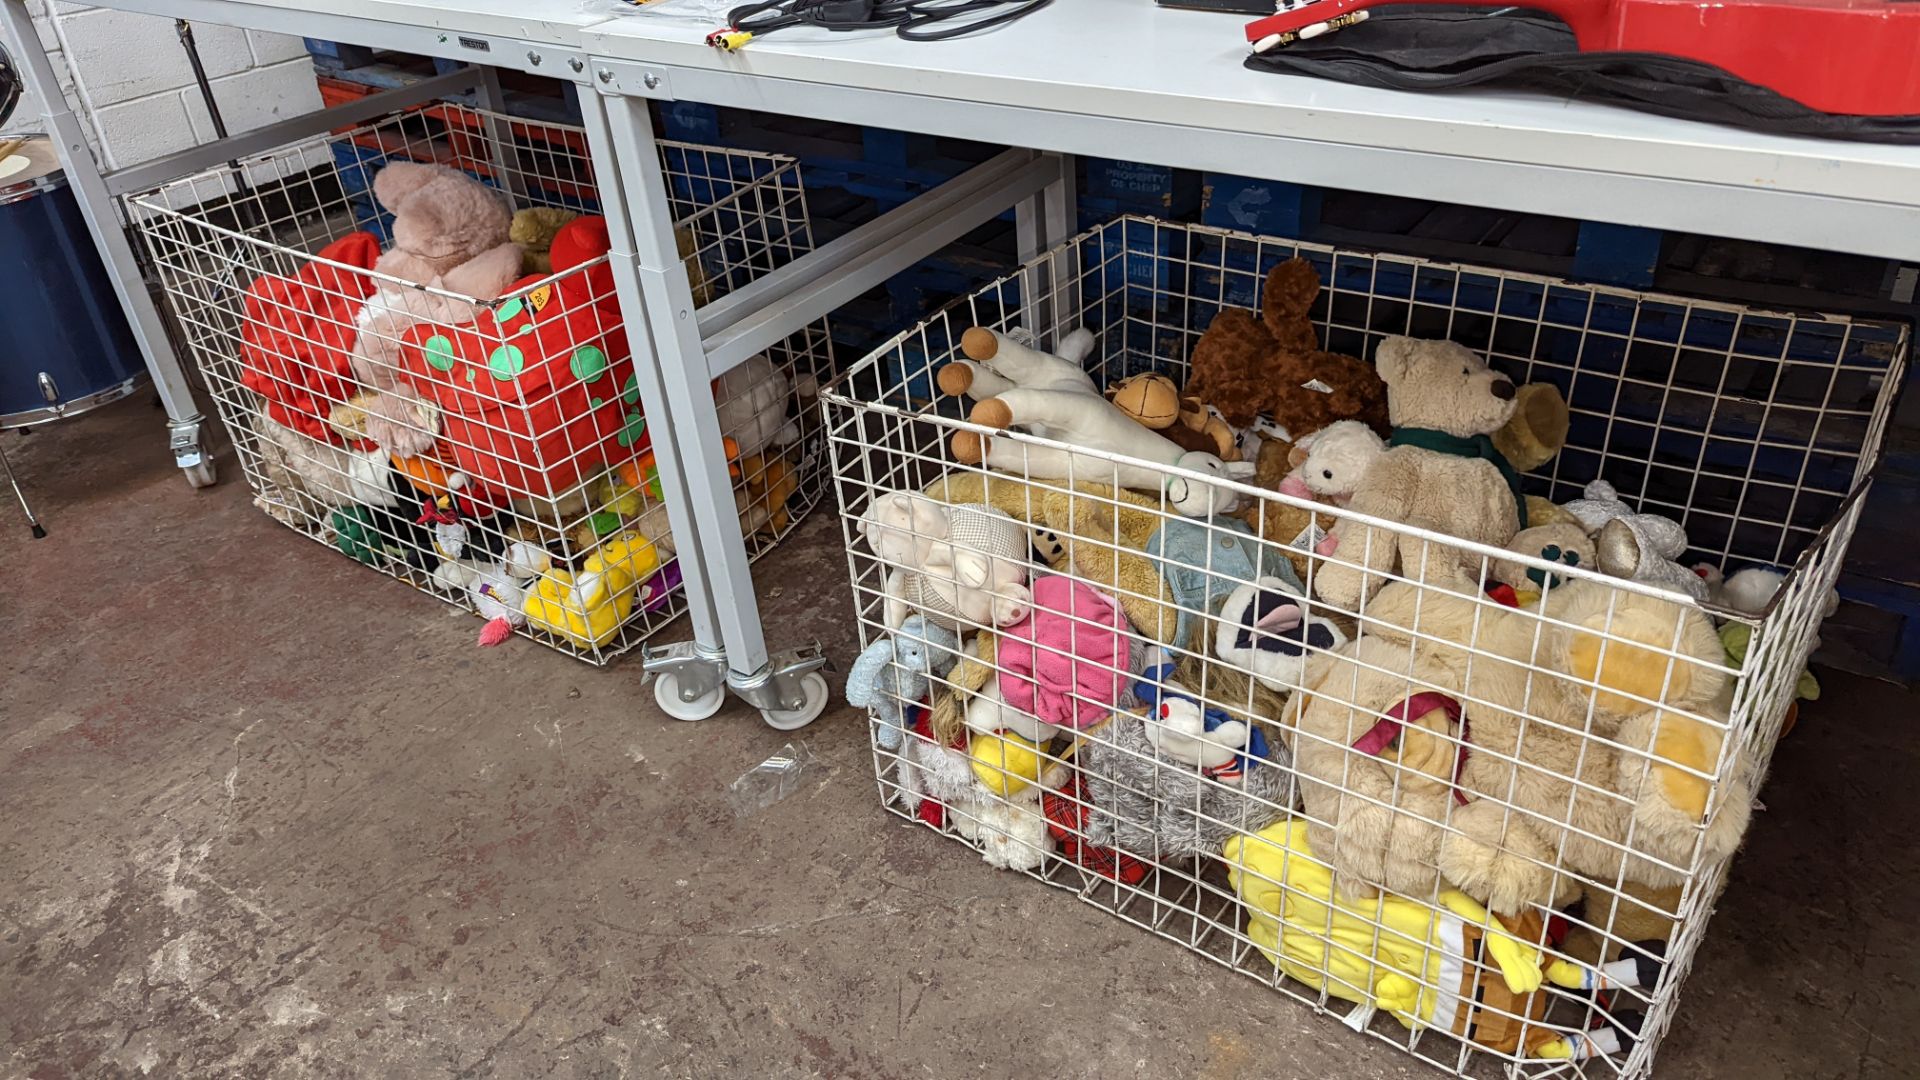 The contents of 2 very large cages of soft toys. NB cages excluded